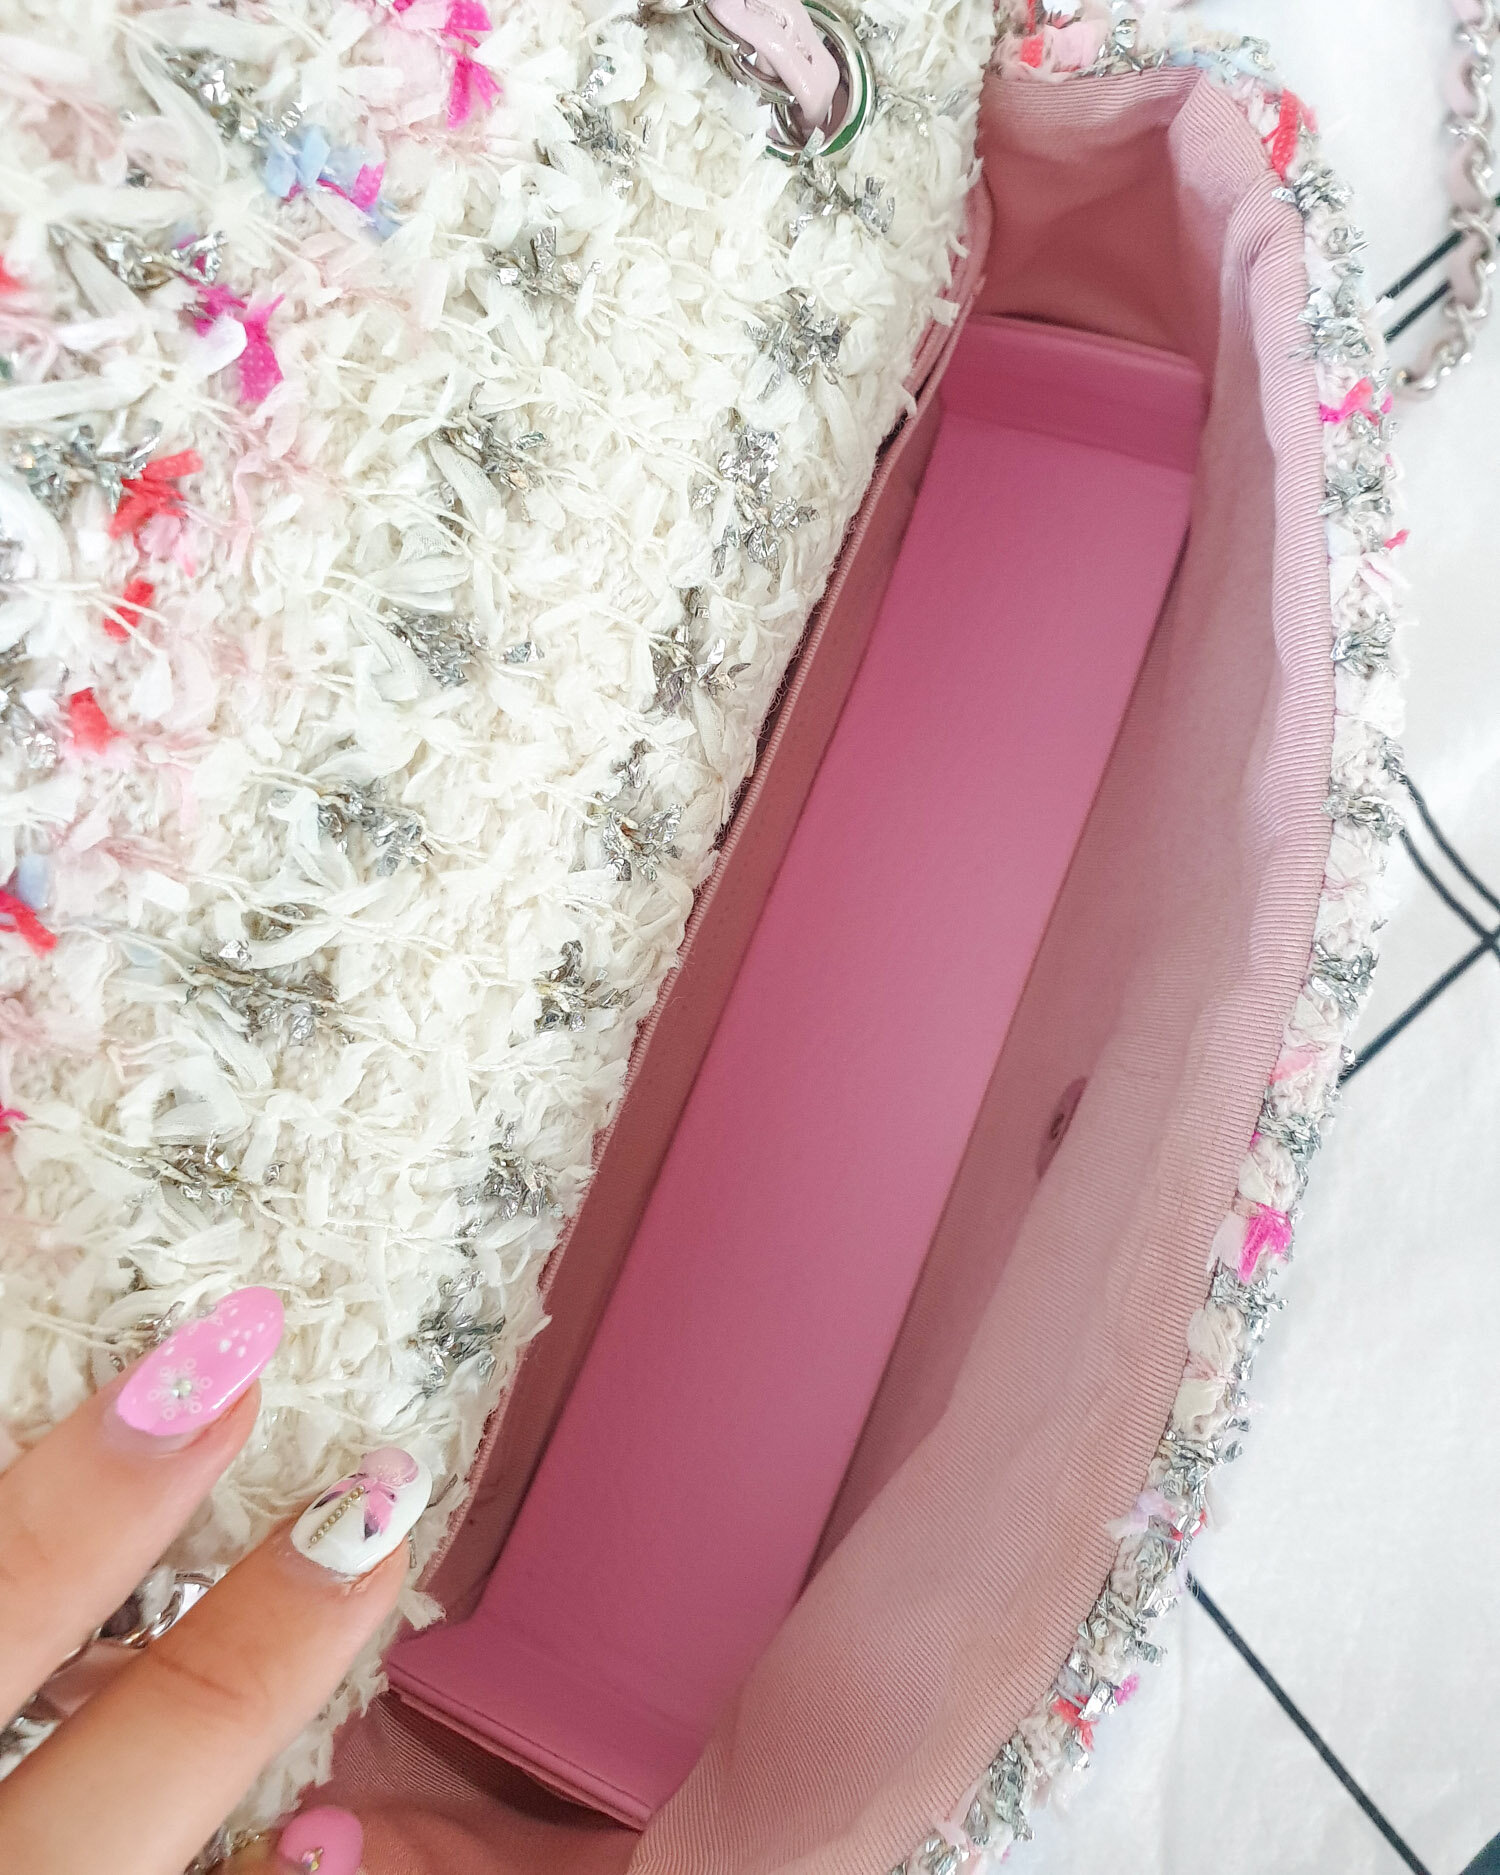 Chanel Handbag Insert  MBoutiqueAU Review — Life with M.B.B.